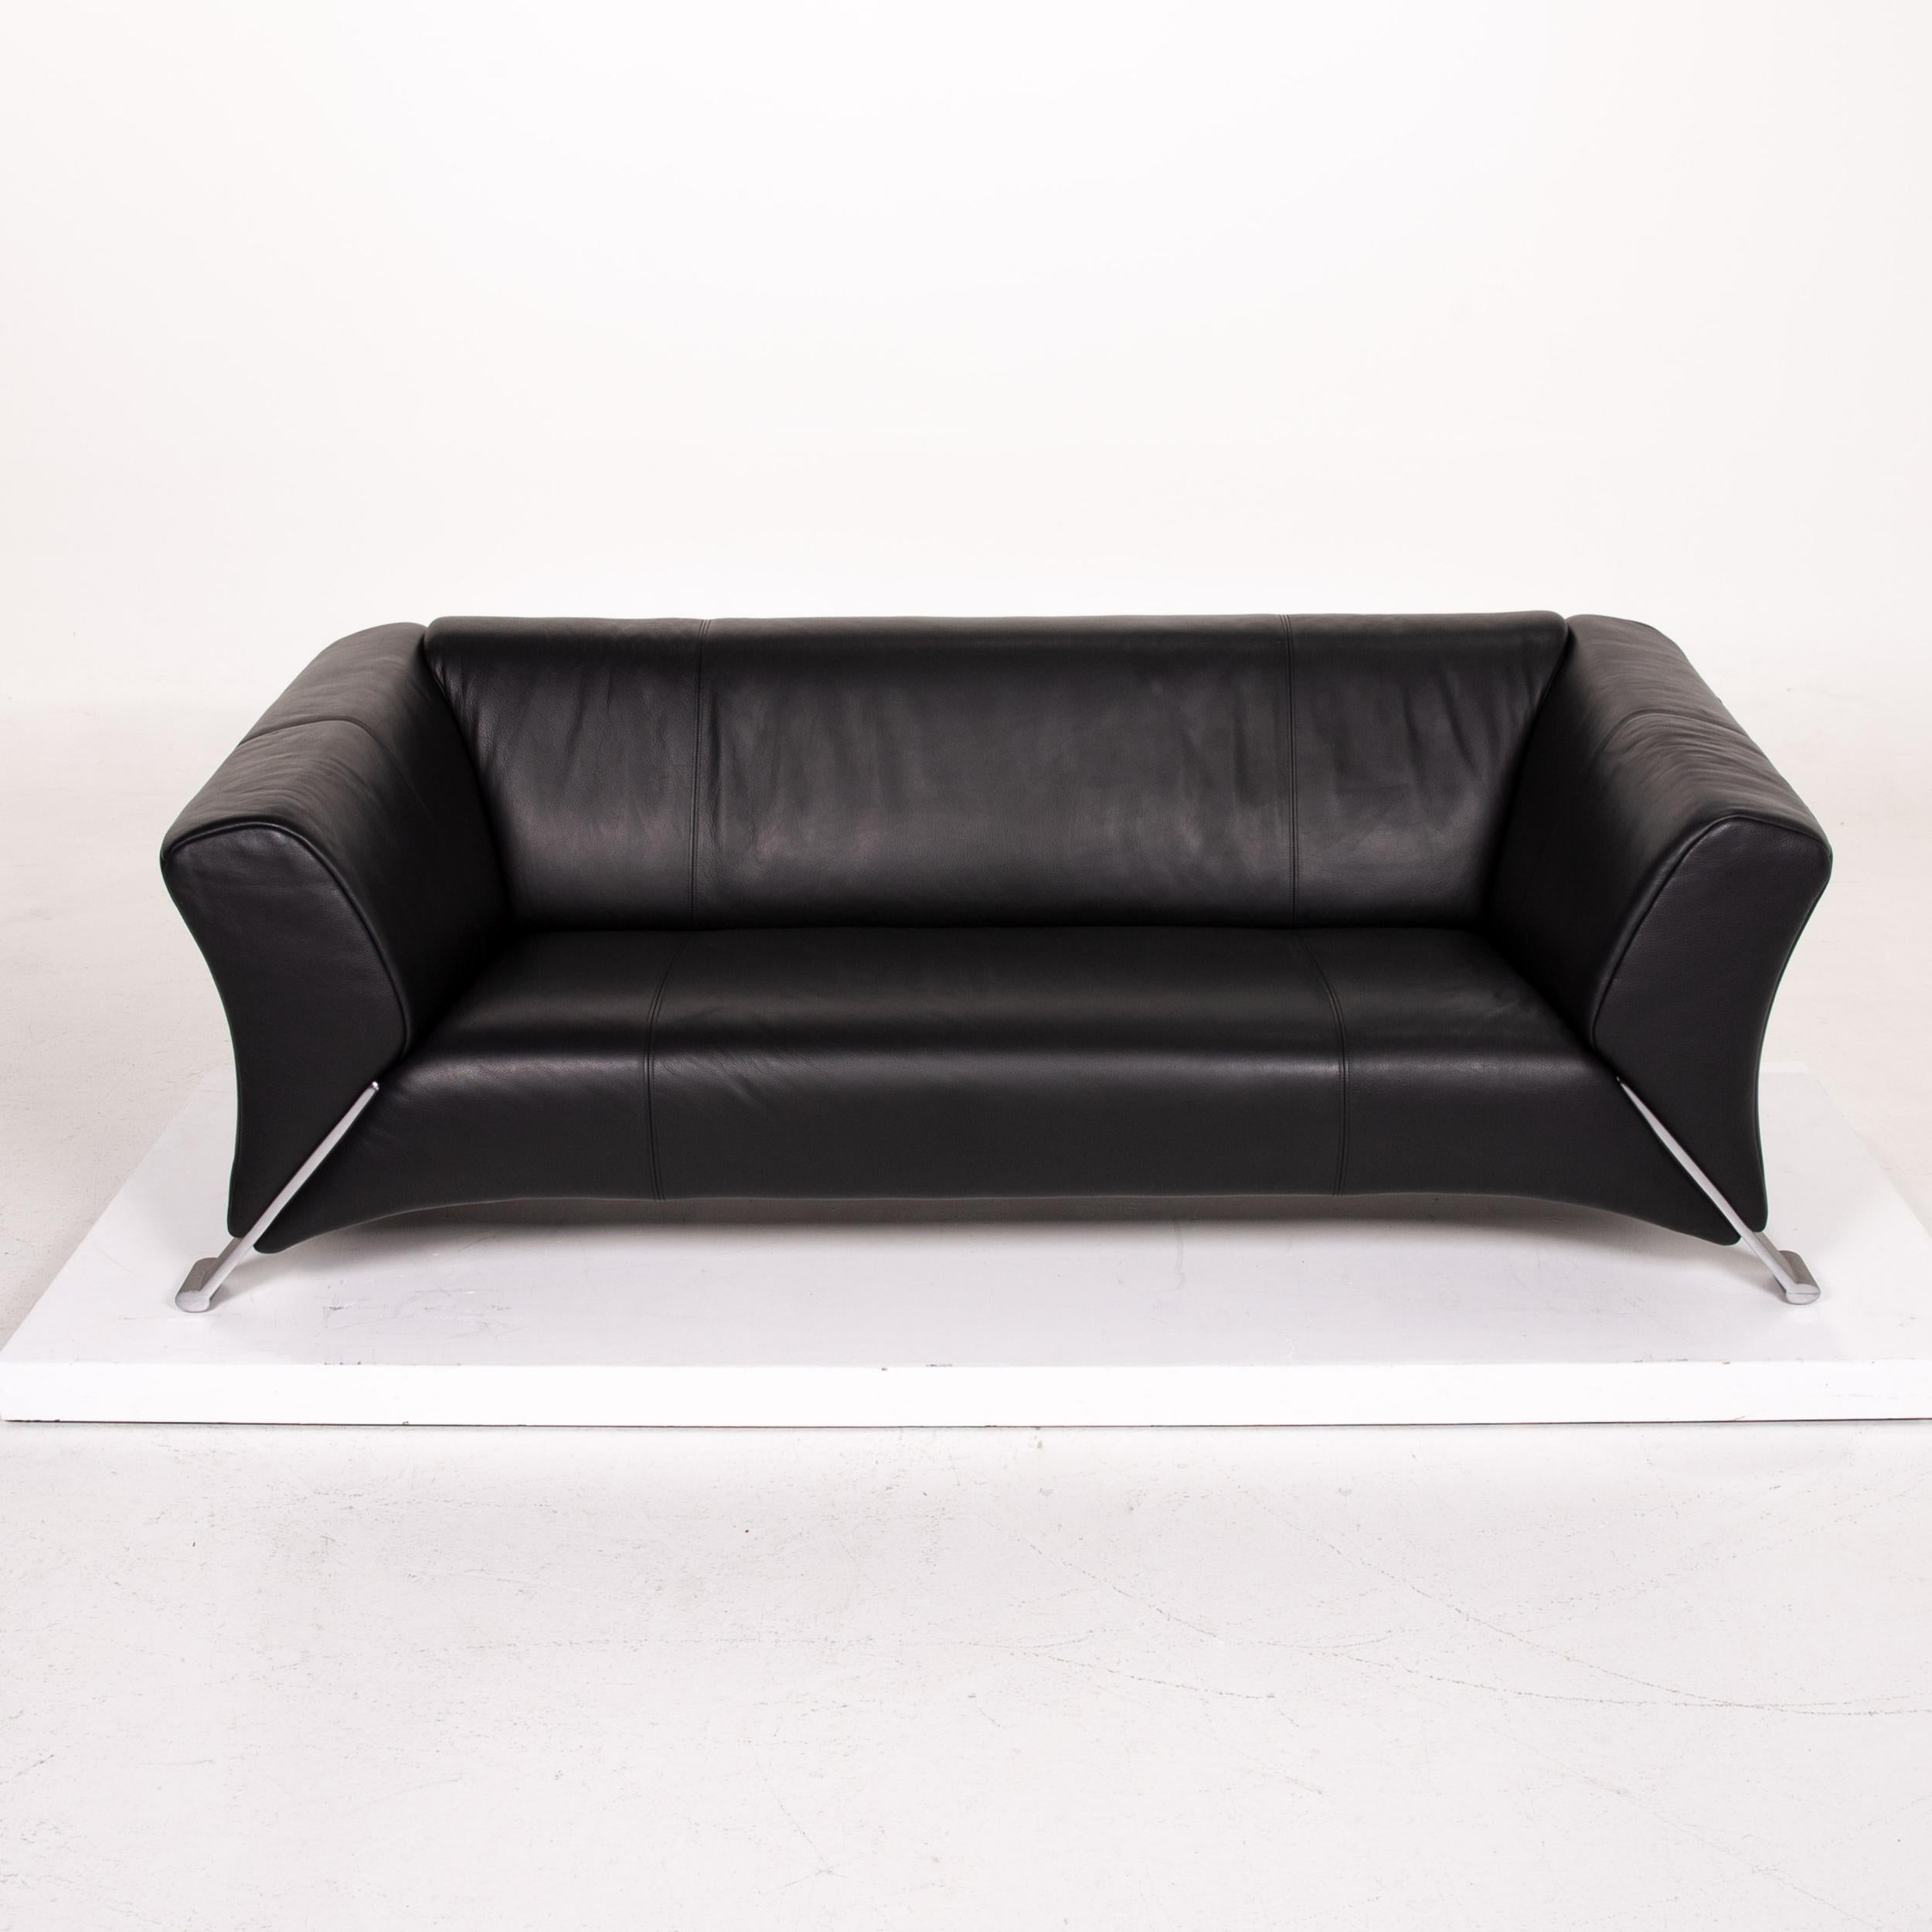 Rolf Benz 322 Leather Sofa Black Three-Seat Couch 1